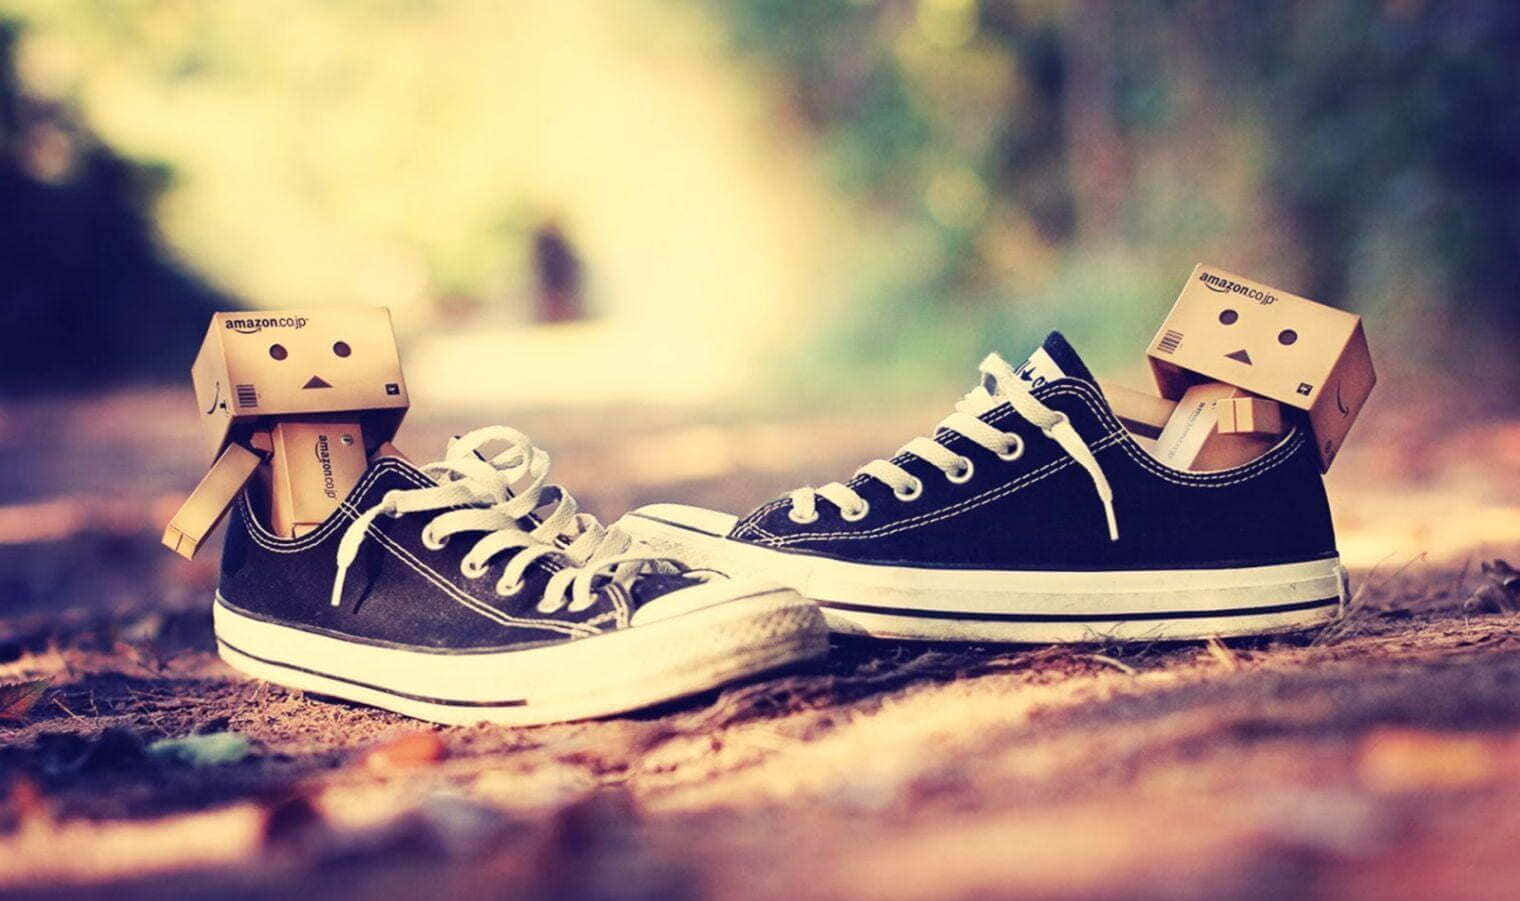 Stylish and Cute Shoes Collection Wallpaper